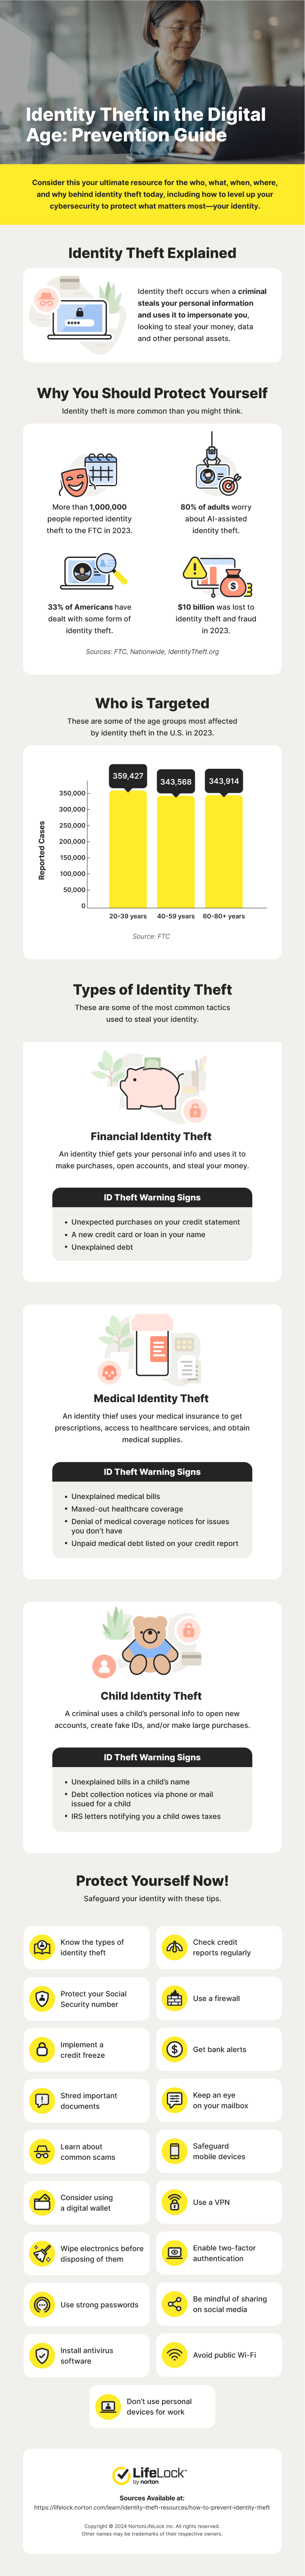 Infographic with information and tips to help you prevent identity theft.